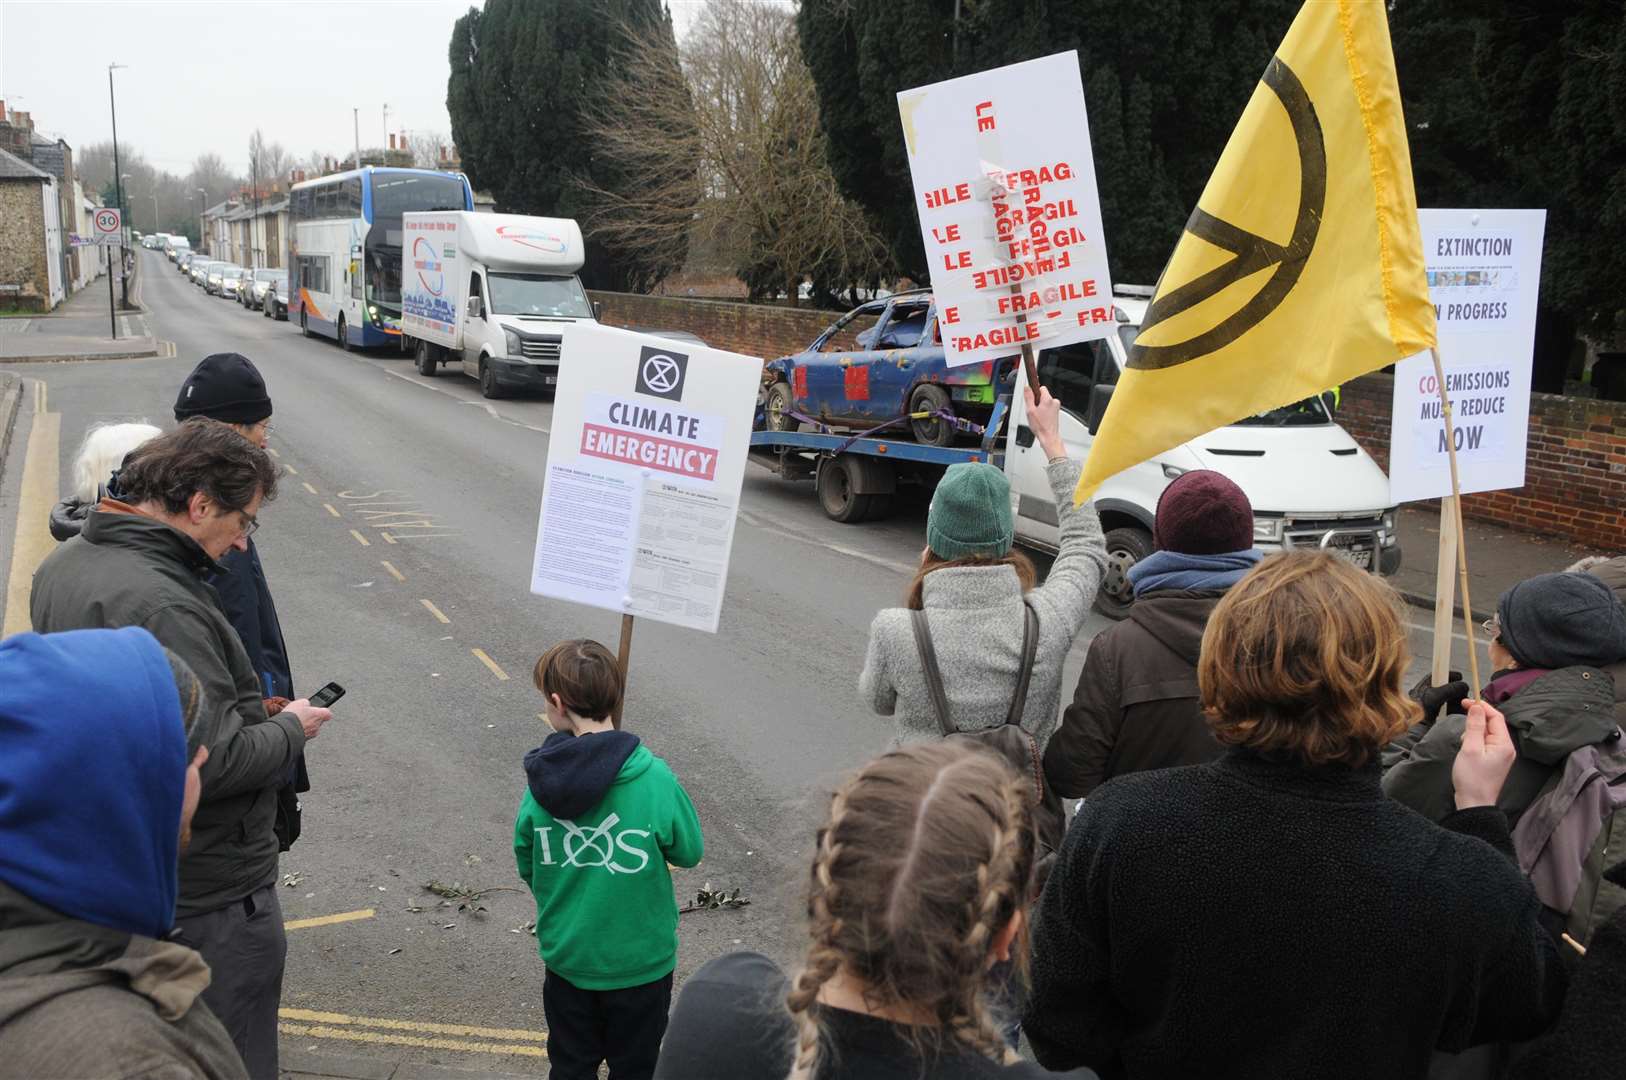 Extinction Rebellion protesters in January